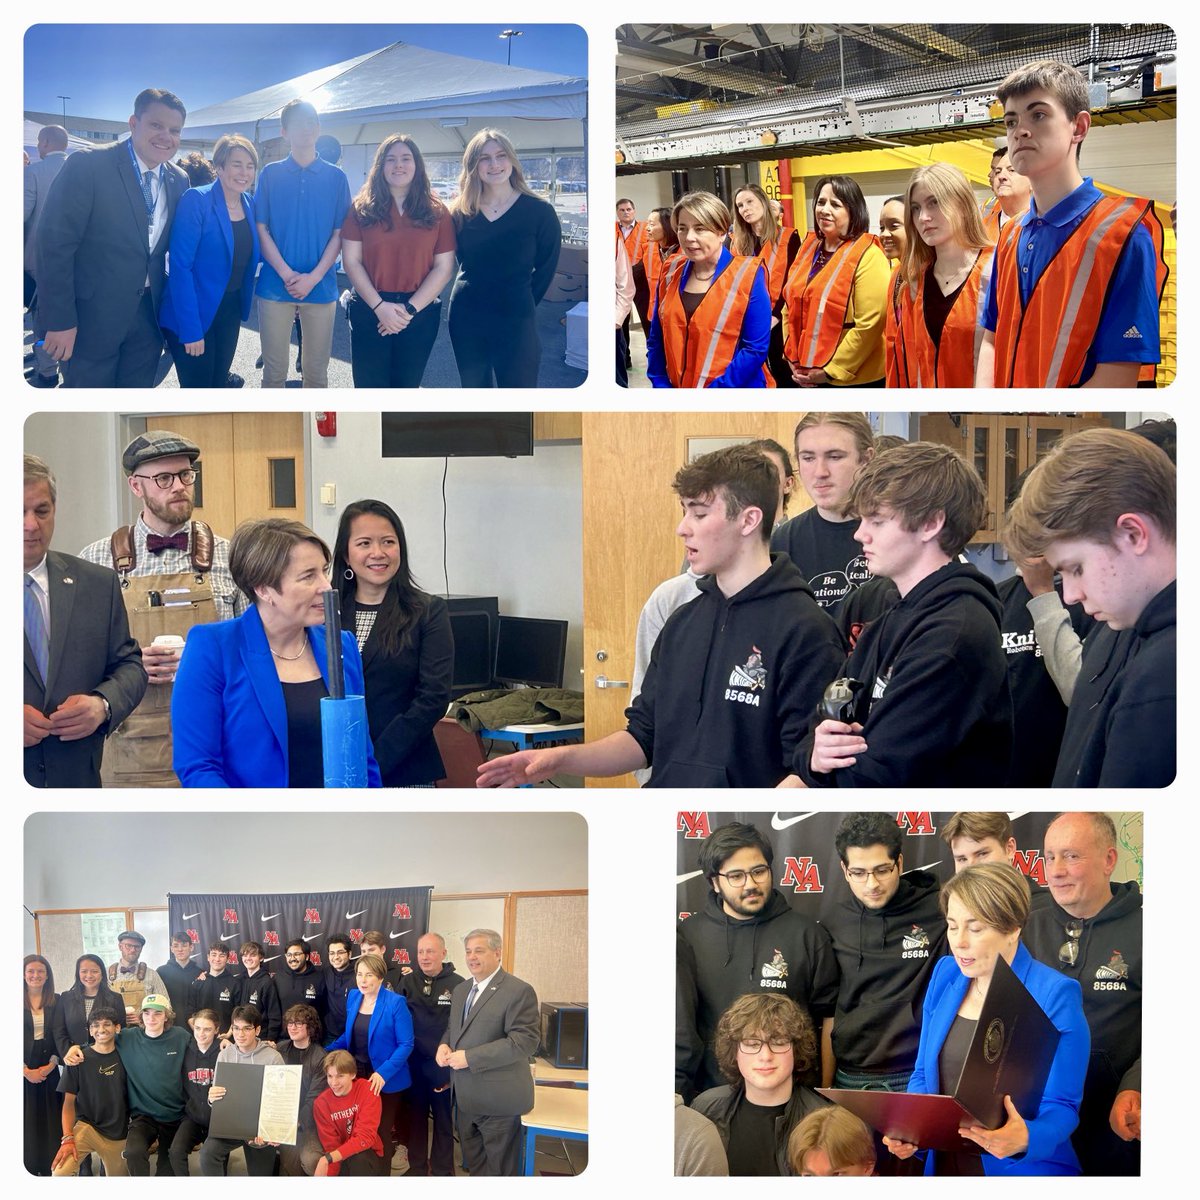 North Andover High School students enjoyed having Governor Healey & Lt Governor Driscoll in NA today! #Robotics #Amazon #WeAreNA